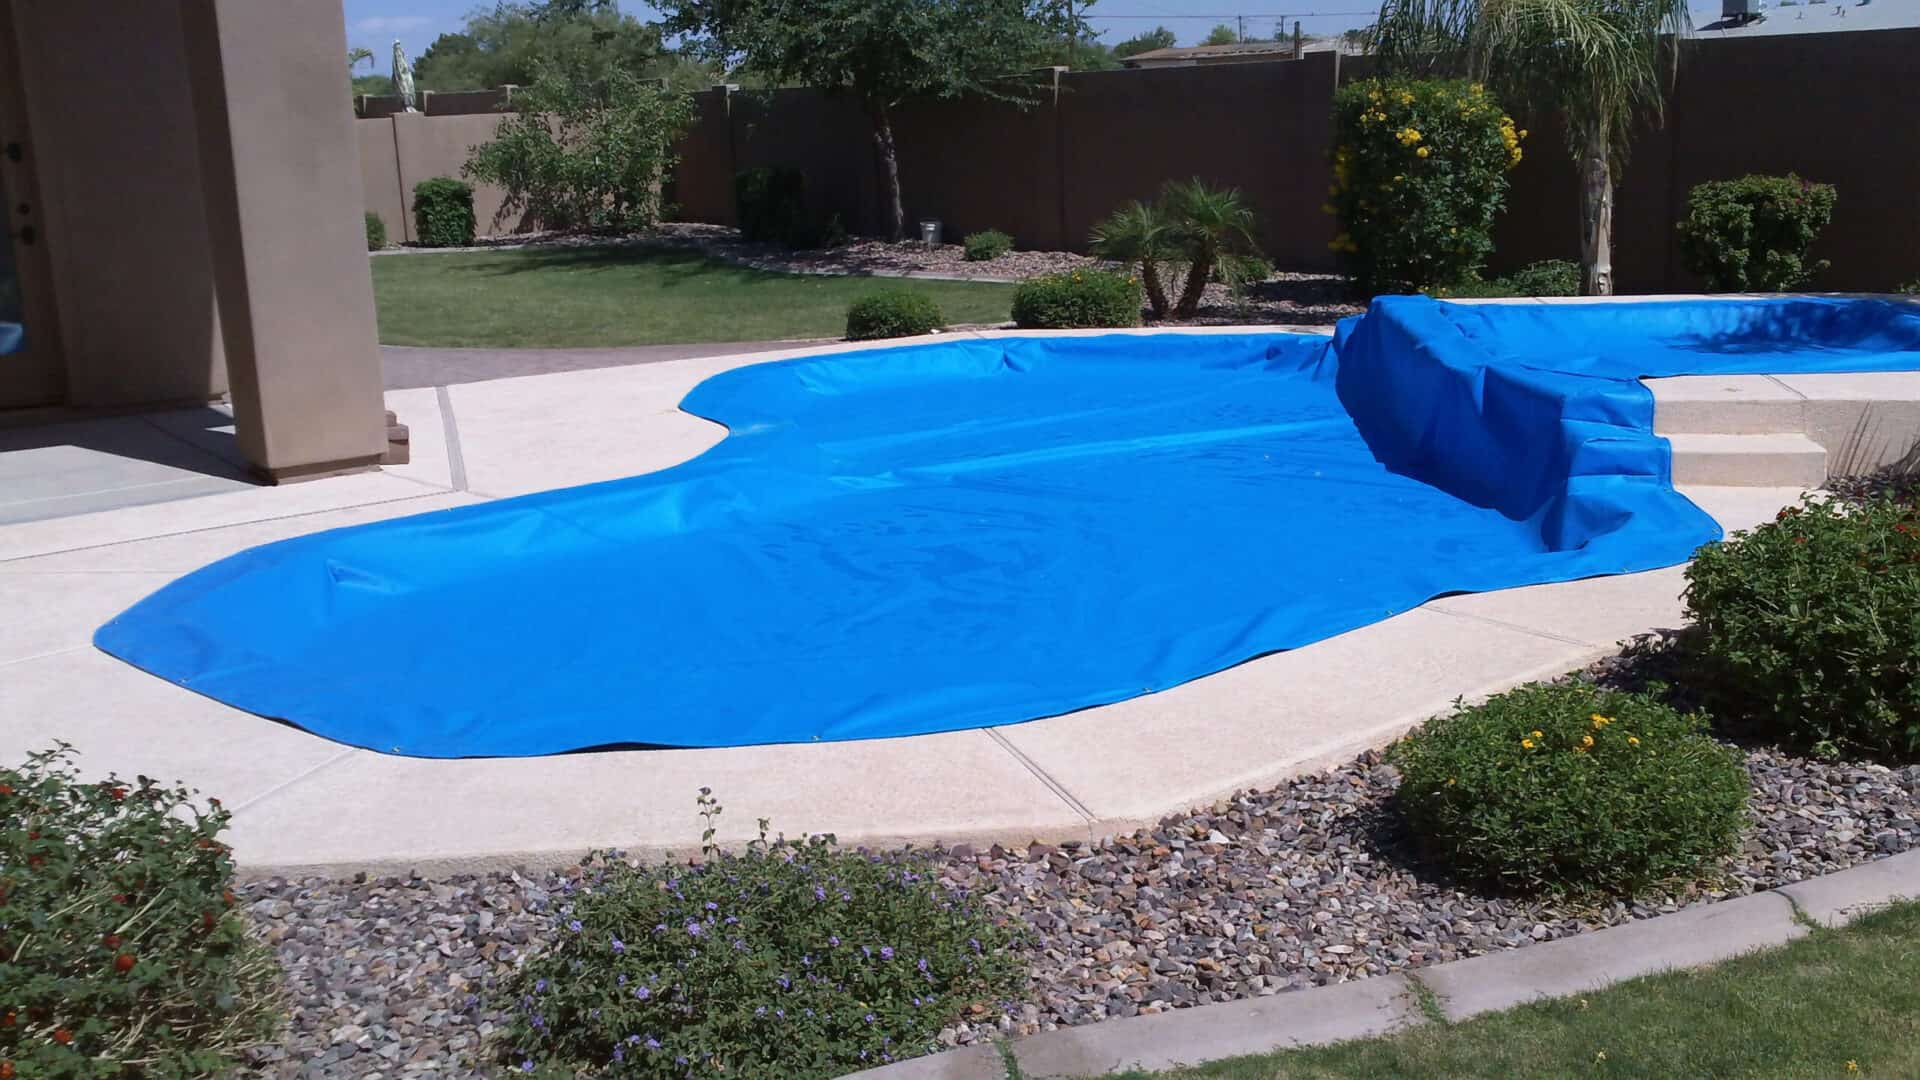 Powerlock Safety pool cover